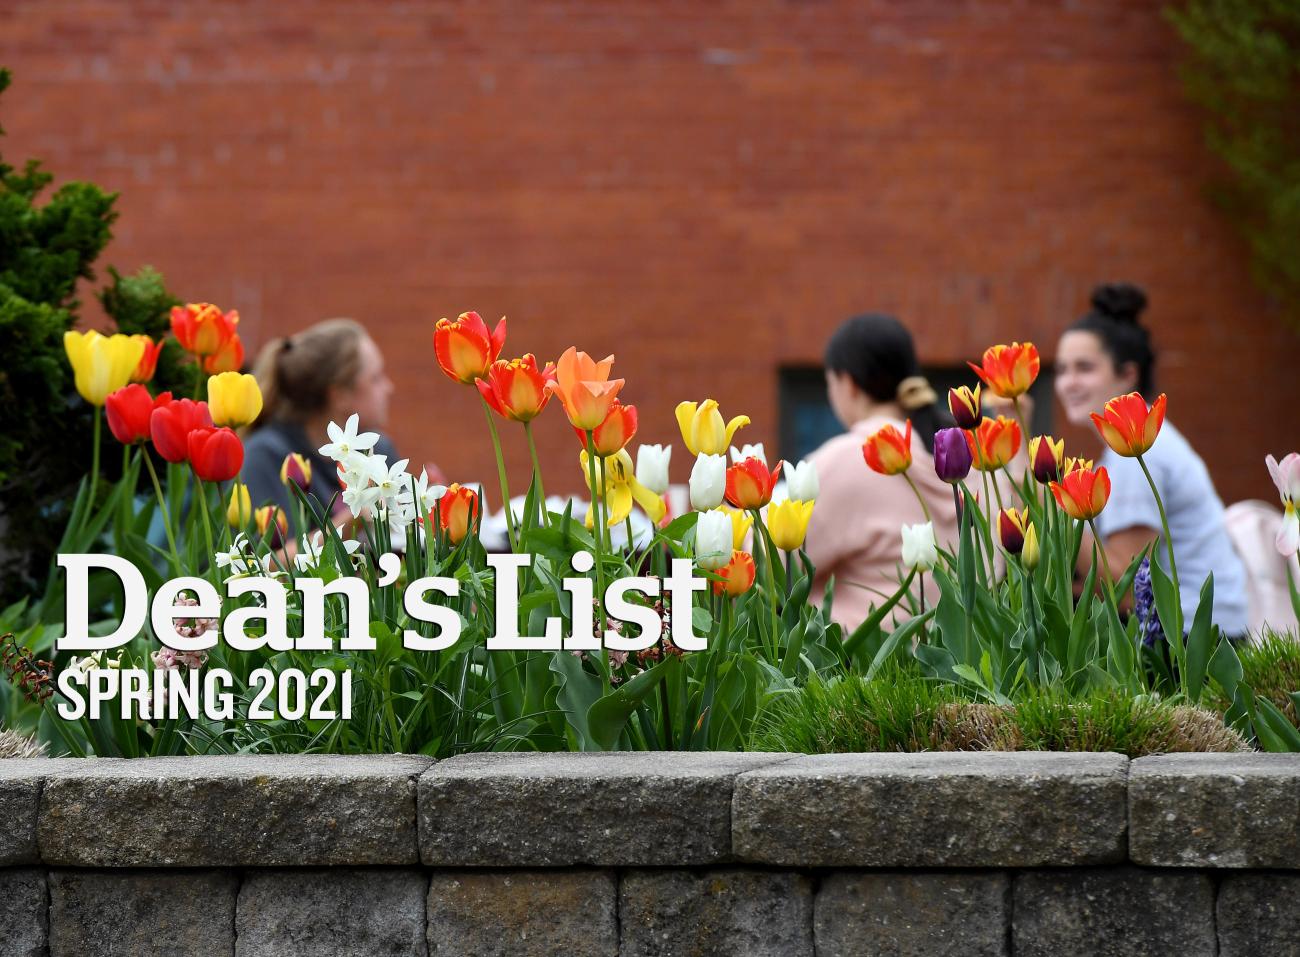 Springfield College is proud of ALL students and congratulates individuals who earned dean's list recognition for the 2021 spring semester. Be sure to check your local newspapers and online publications for possible mentions. Most publications will publish the dean's list mentions based on space available during the upcoming weeks and months.